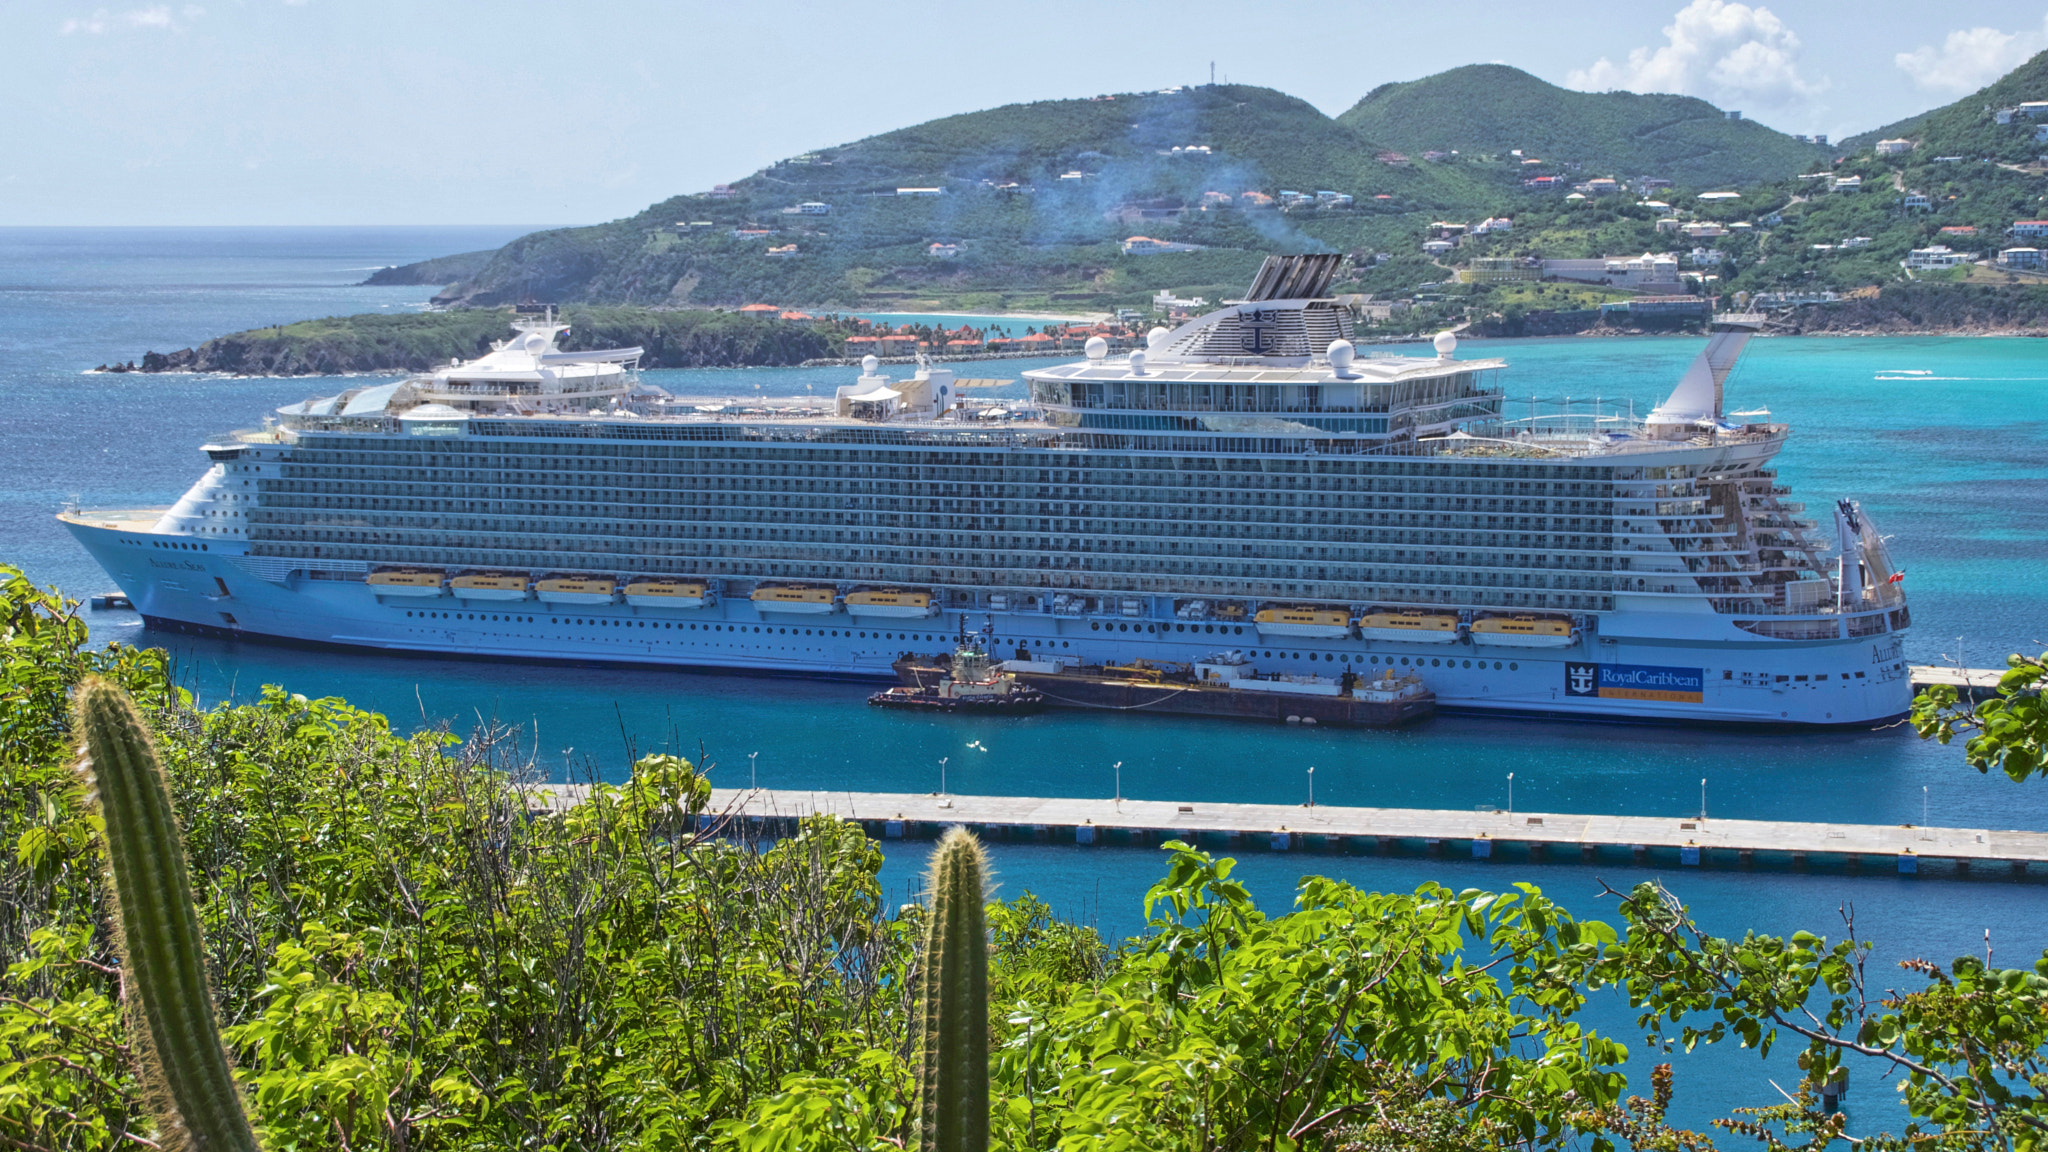 Pentax K-3 sample photo. Cruise ship "allure of the seas" at port st.maarten photography